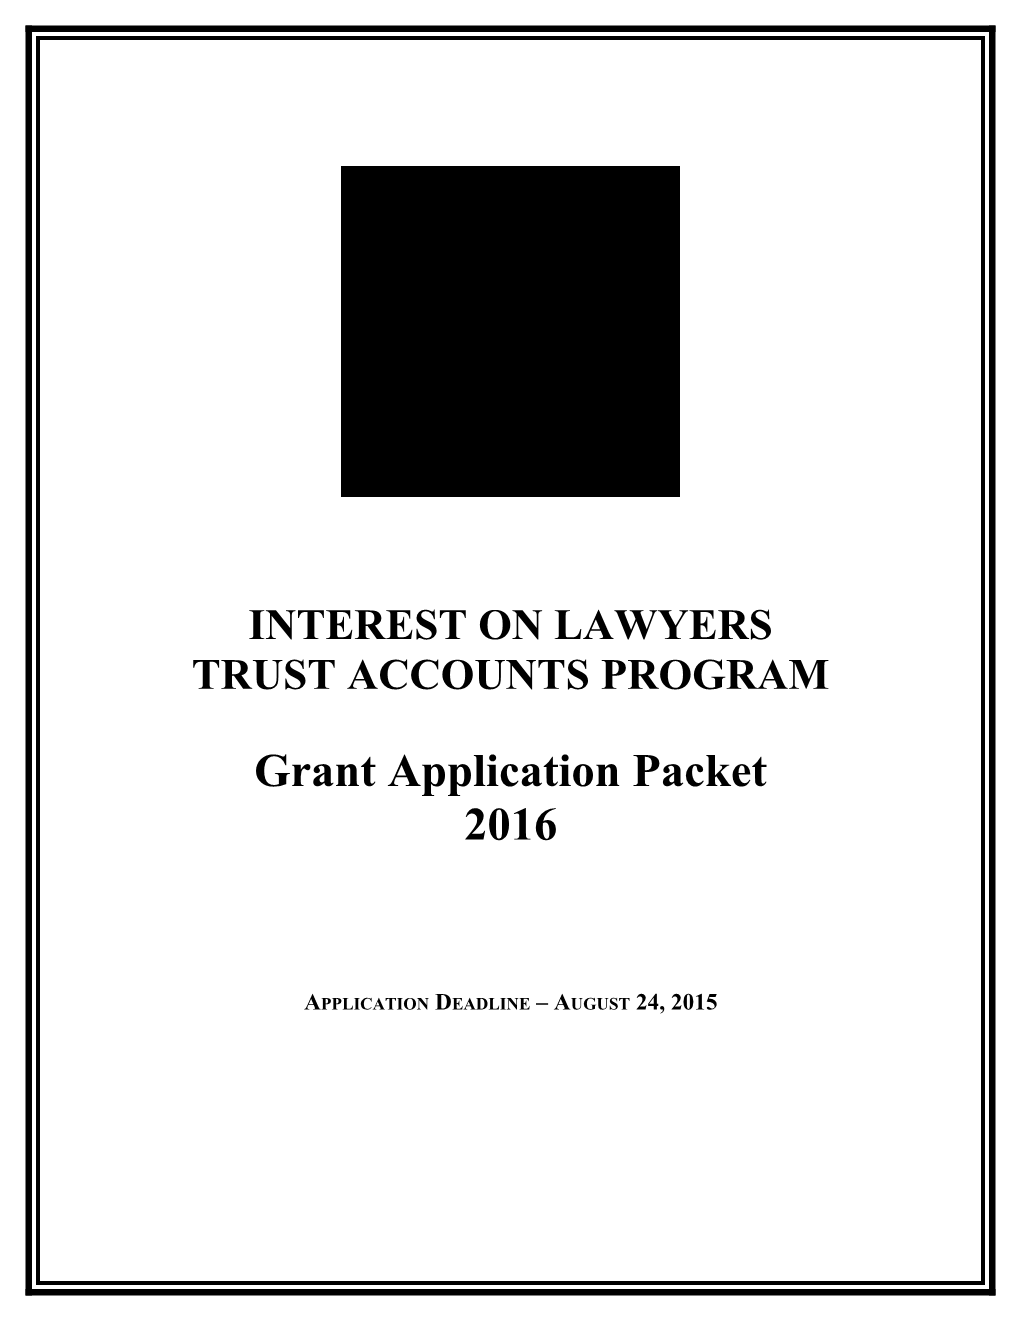 Interest on Lawyers